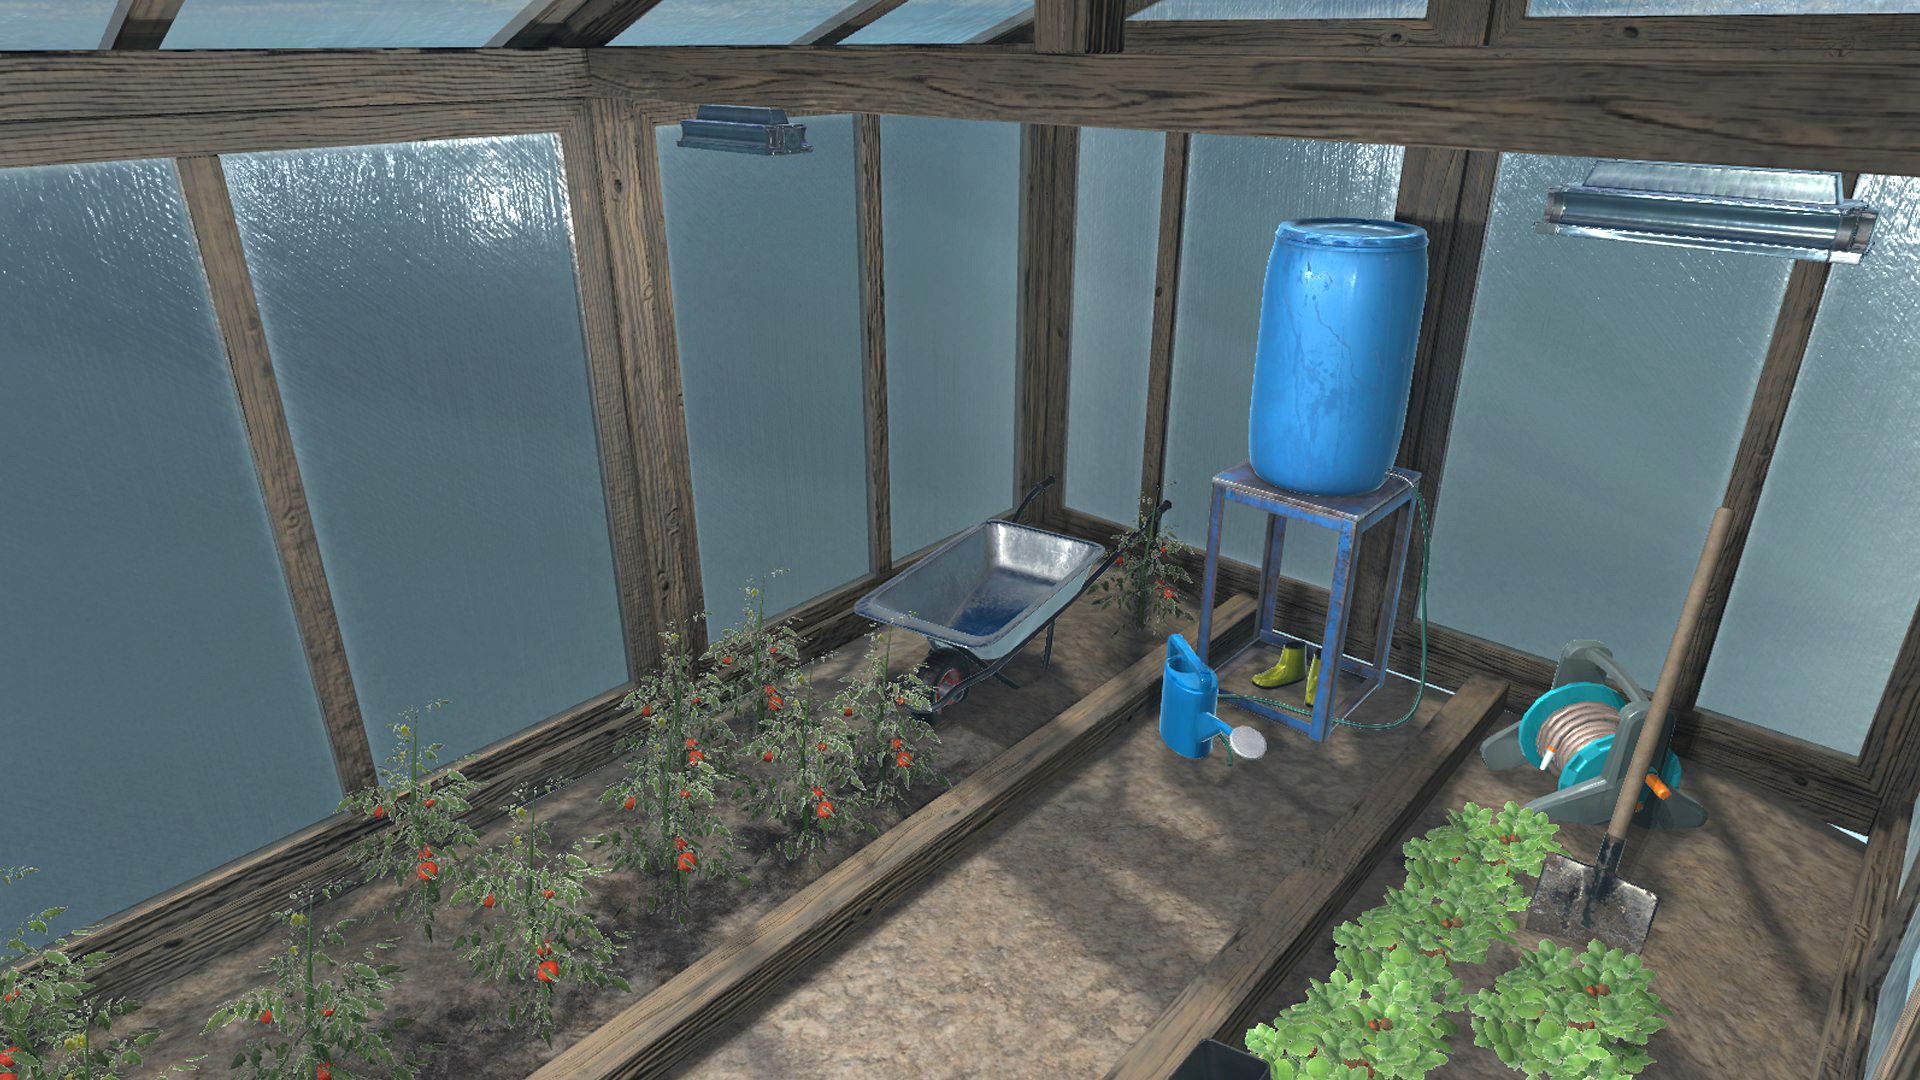 Greenhouse - interior and props